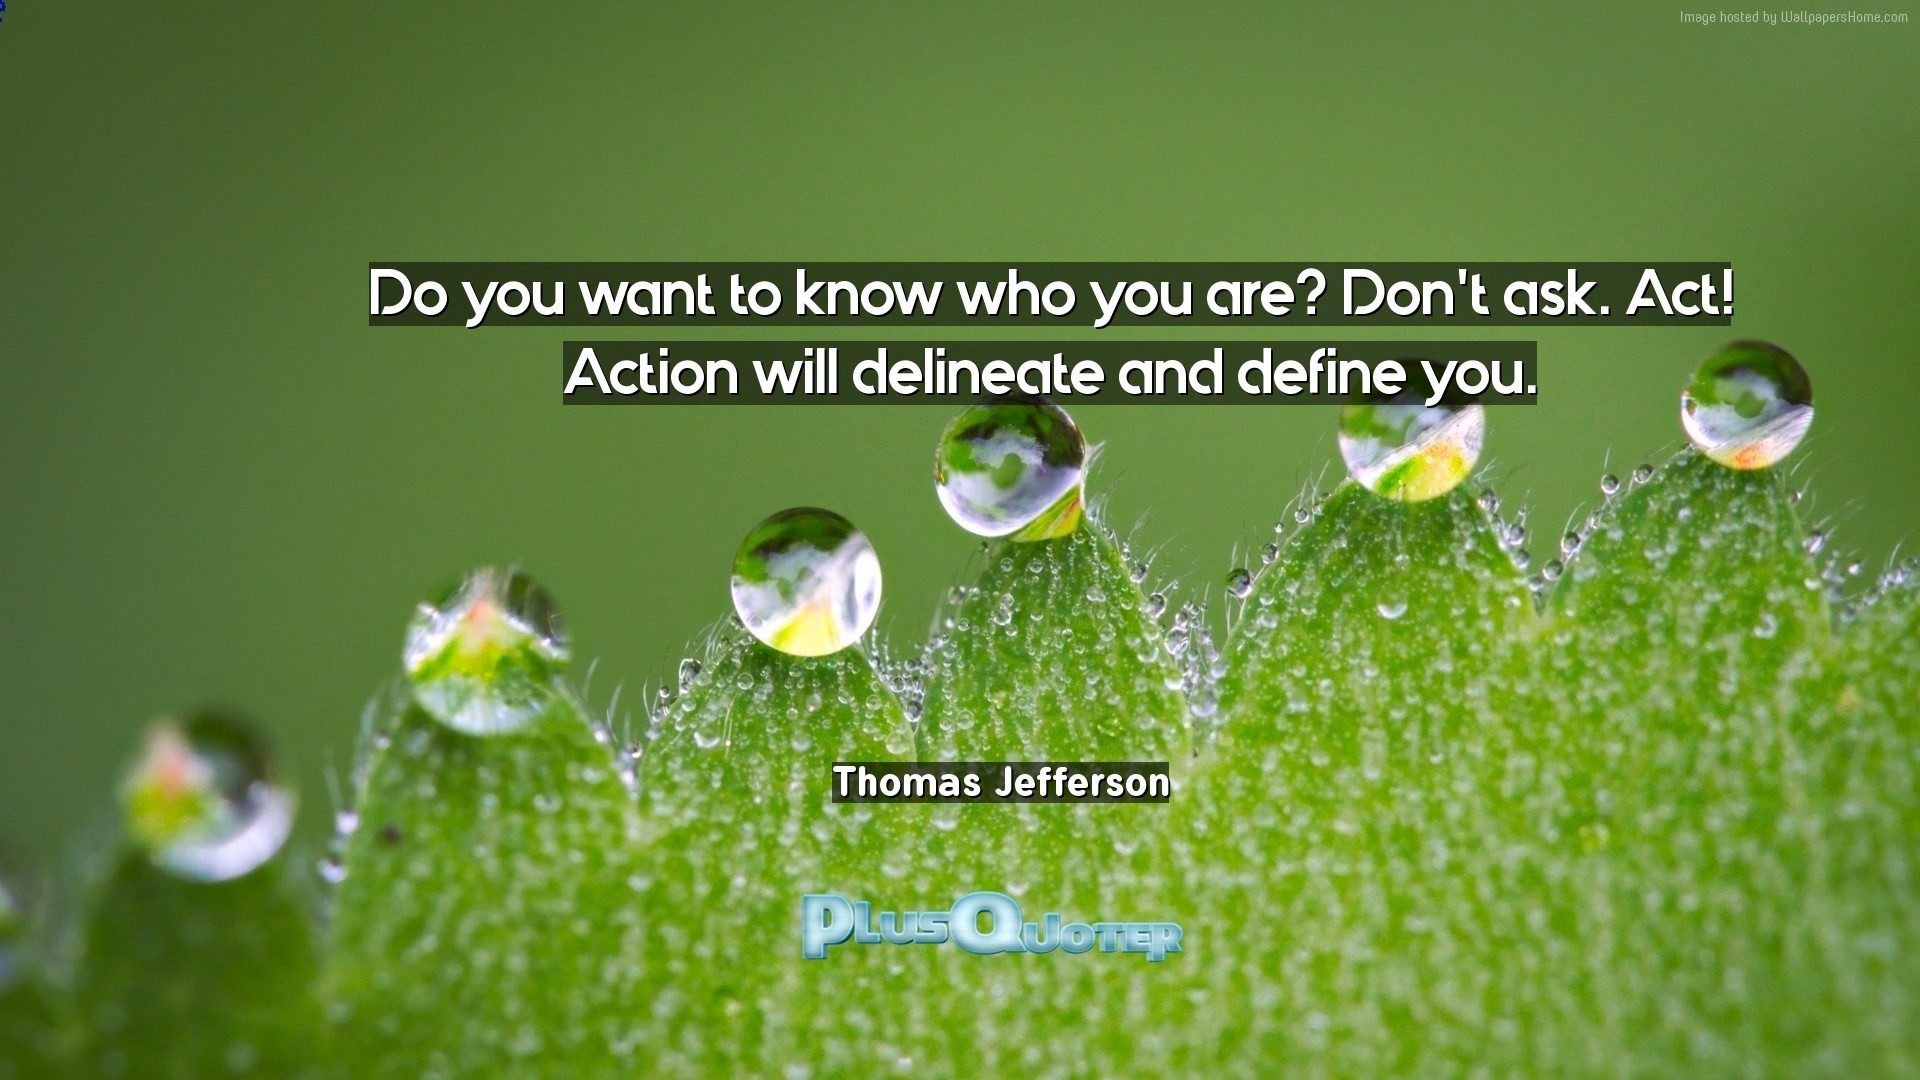 1920x1080 Download Wallpaper with inspirational Quotes- "Do you want to know who you  are?